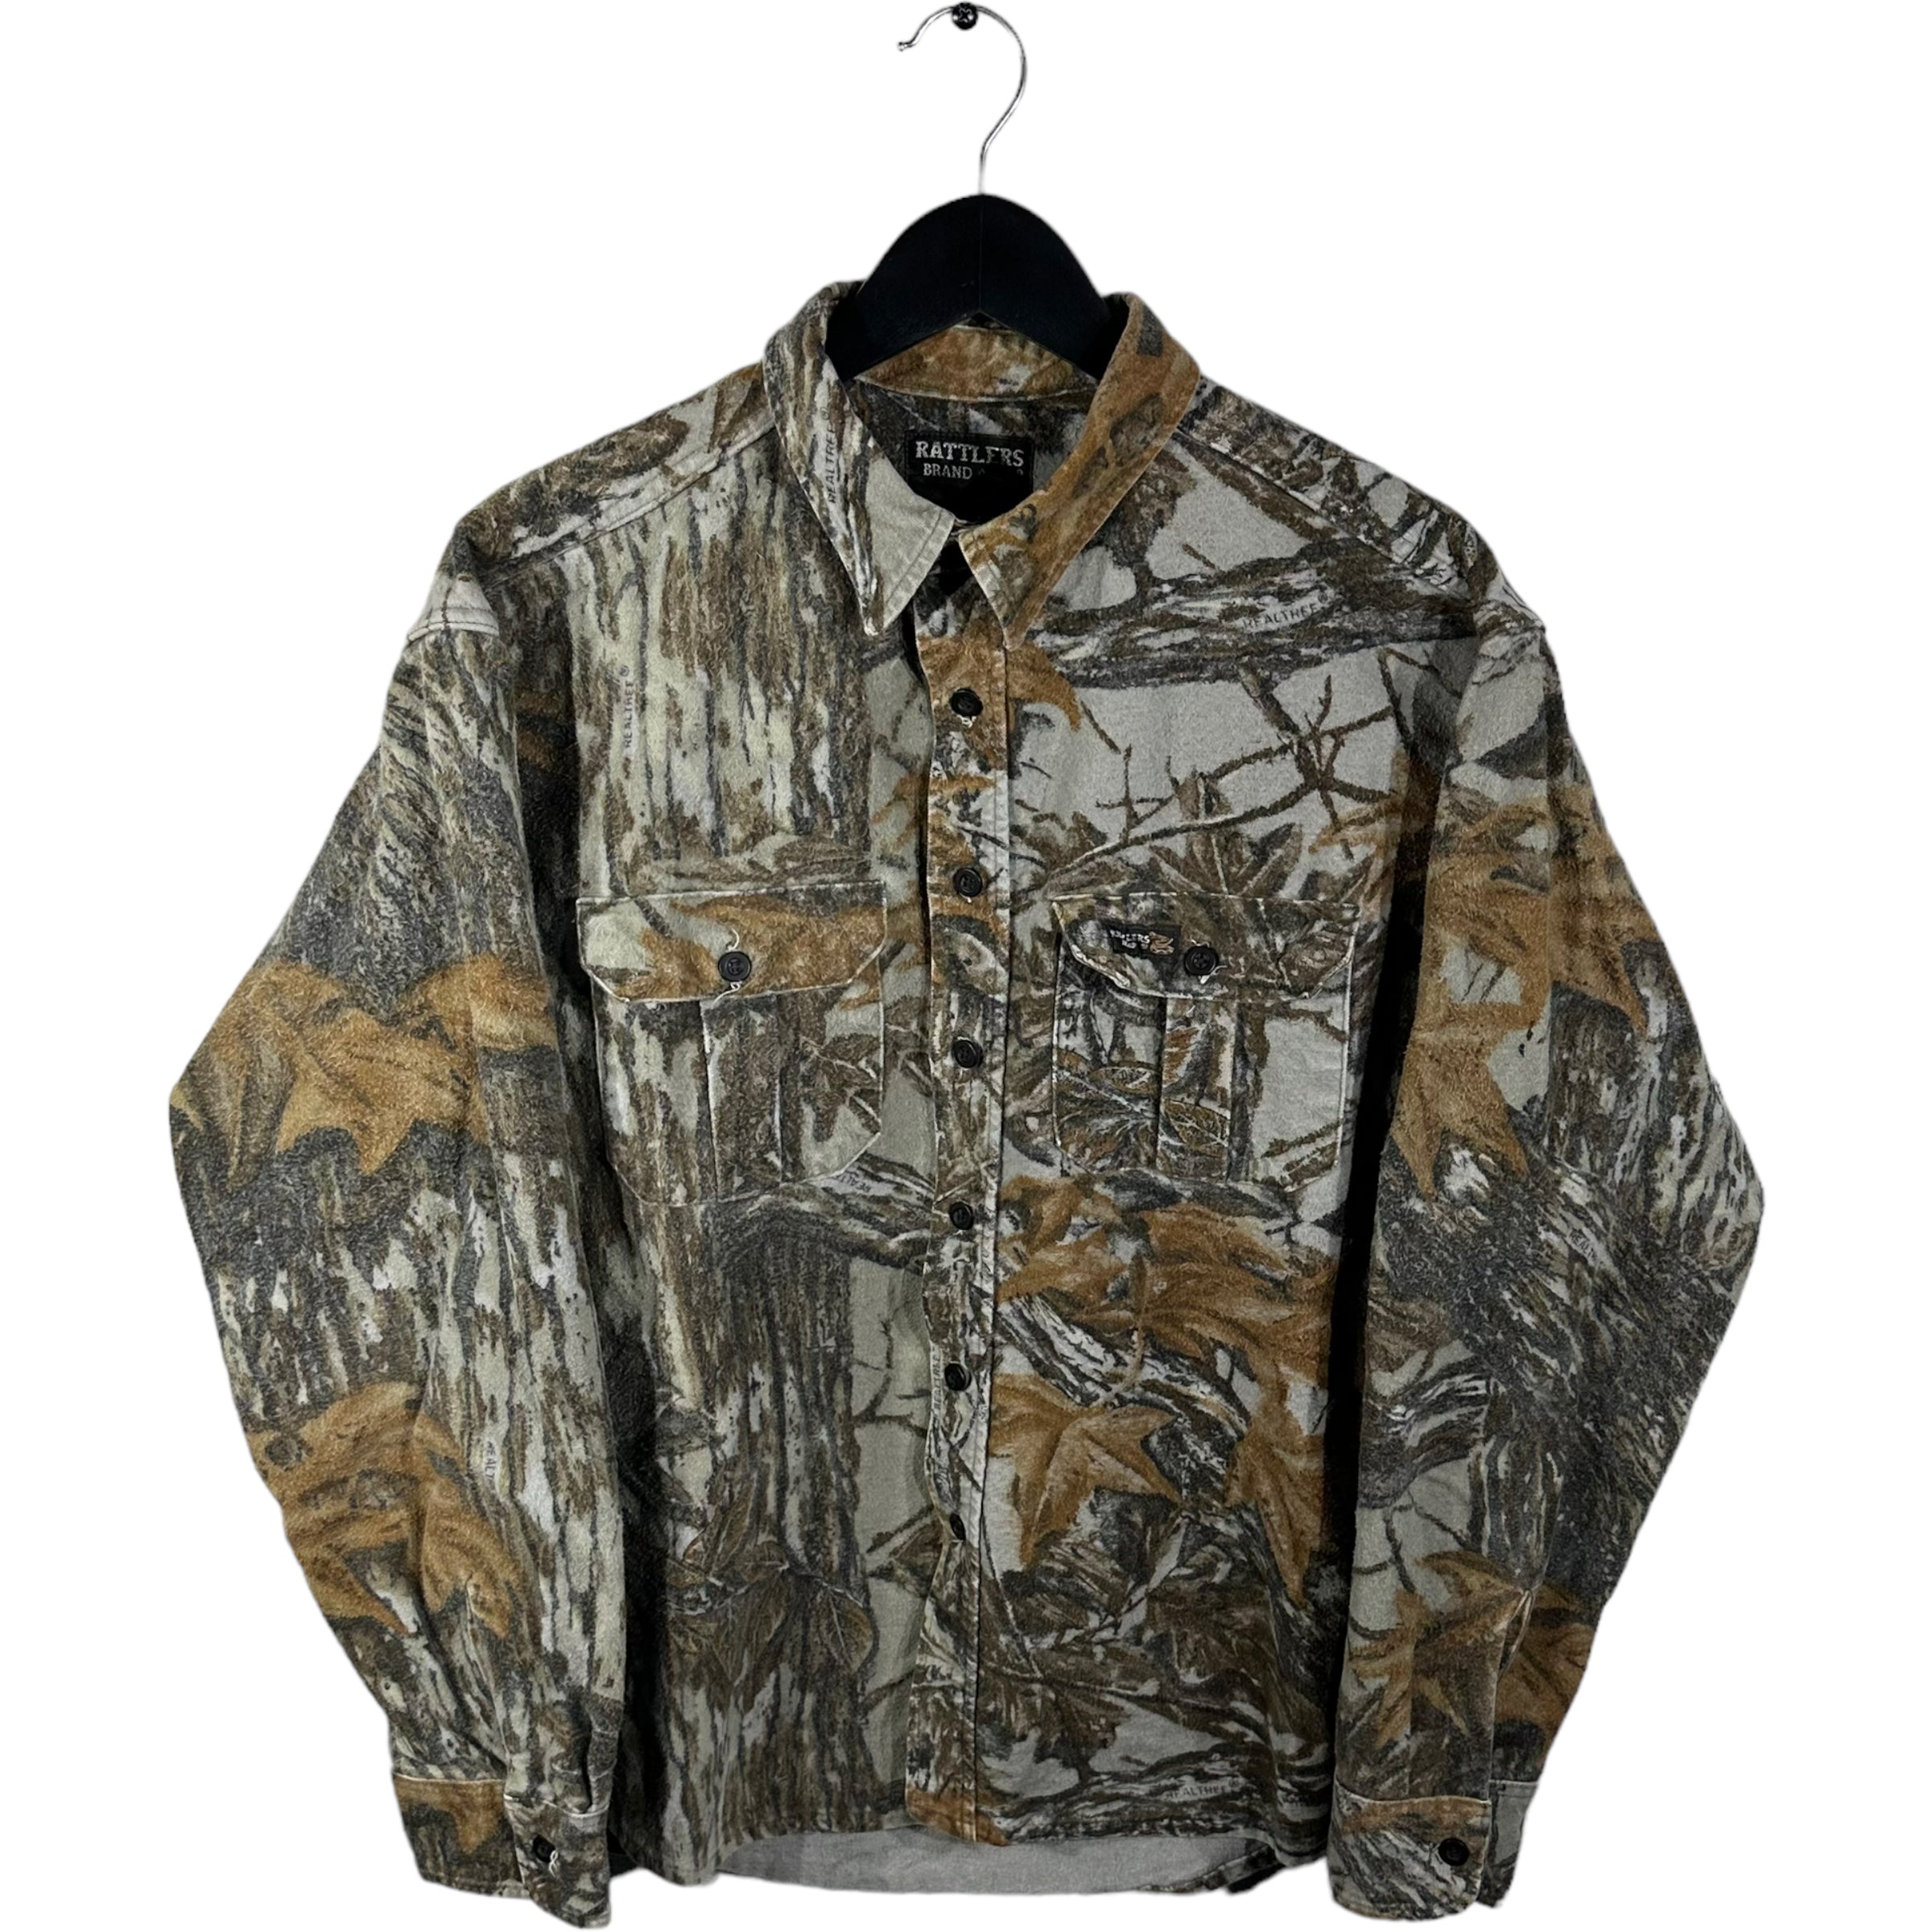 Vintage Rattlers RealTee Camo Button Down